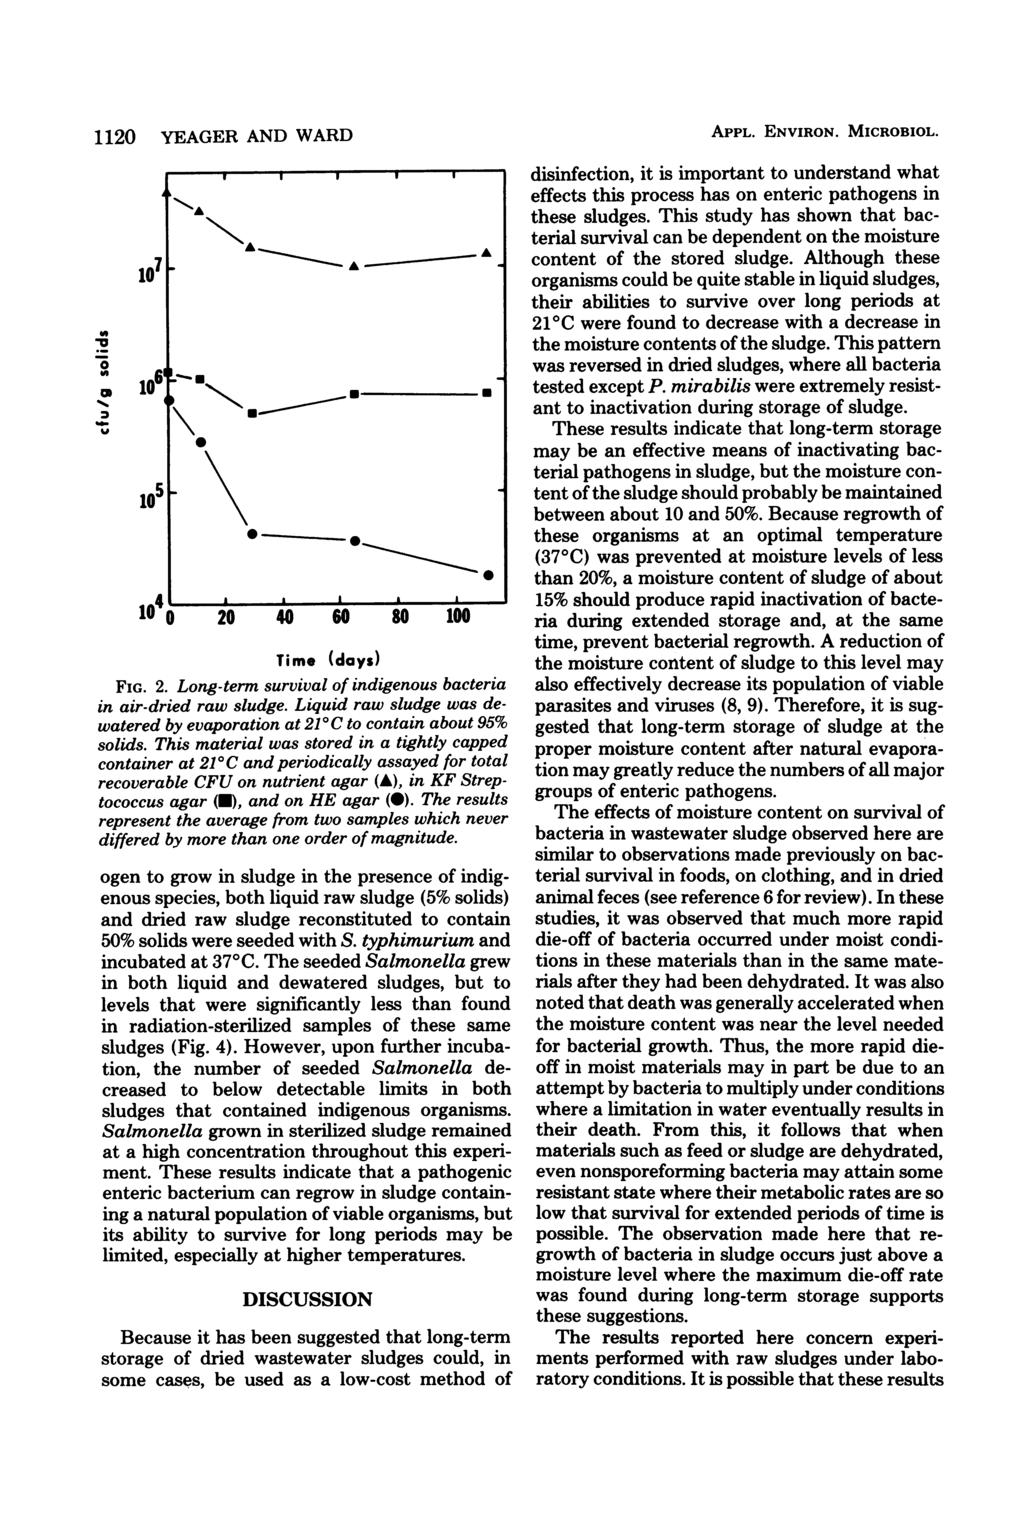 1120 YEAGER AND WARD -ola to lm 107F 106' 105 I I I I I AA "I.,A!-.A. 0 20 40 60 80 100 Time (days) FIG. 2. Long-term survival of indigenous bacteria in air-dried raw sludge.